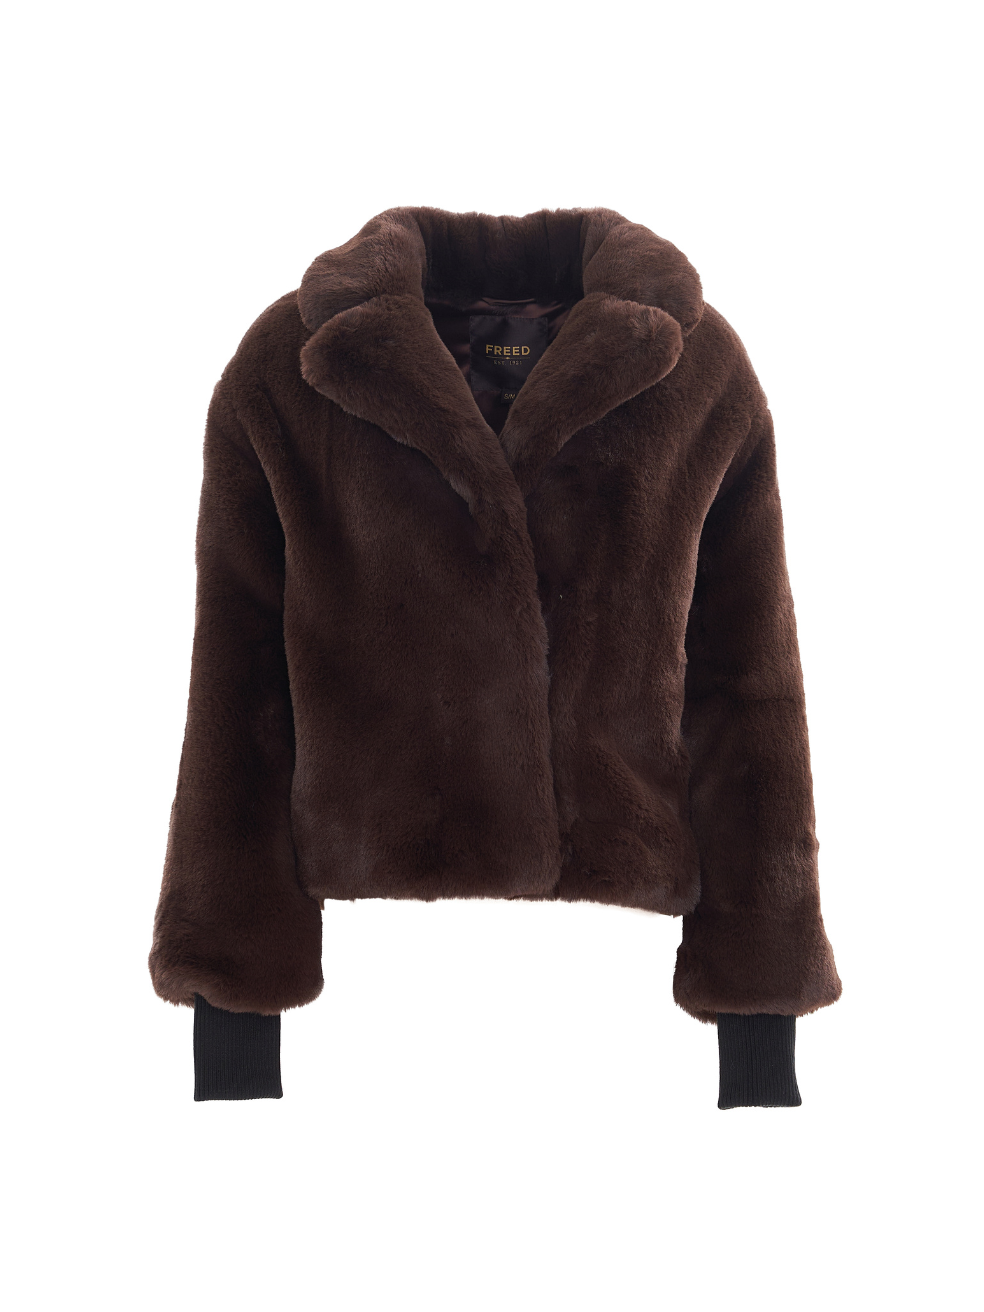 Sawyer Espresso Brown Sustainable Cold Weather Upcycled Outerwear Cropped Coat Animal Free Fur